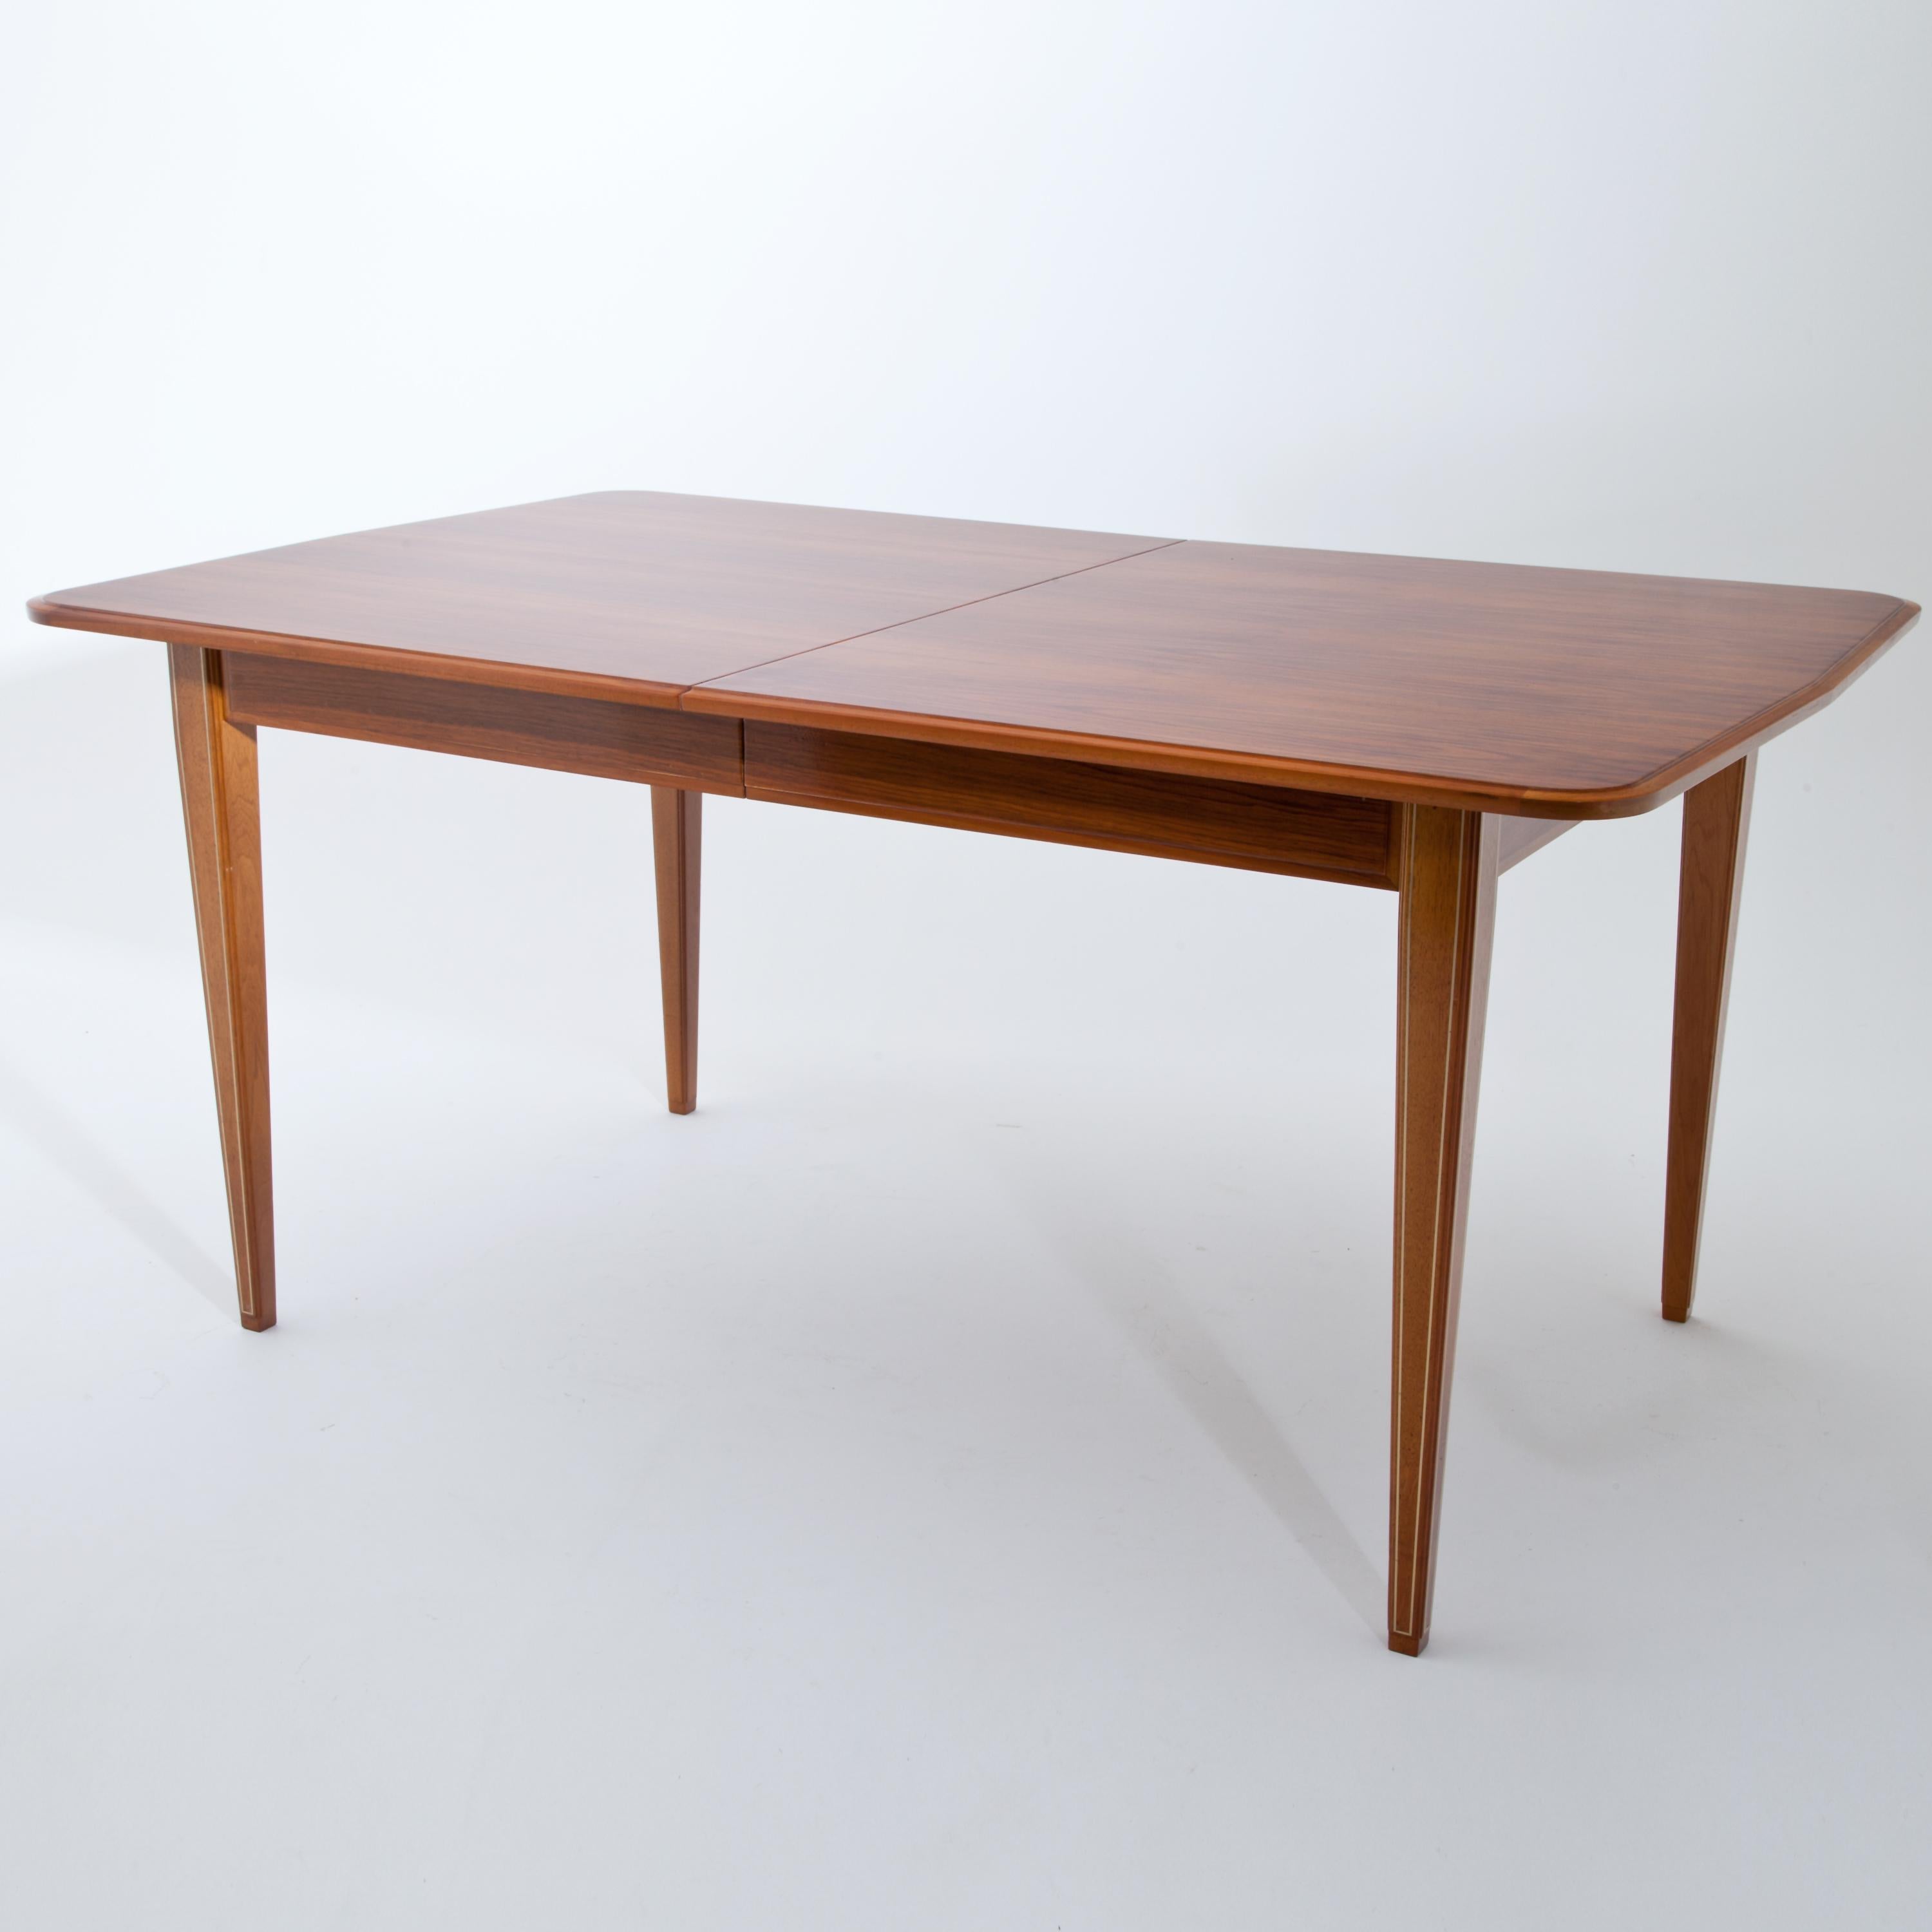 Rectangular extendable dining table with square pointed legs and straight smooth frames. The tabletop is profiled at the edges and tapers slightly at the narrow sides. The legs are inlaid with brass threads. Very good restored condition. The maximum